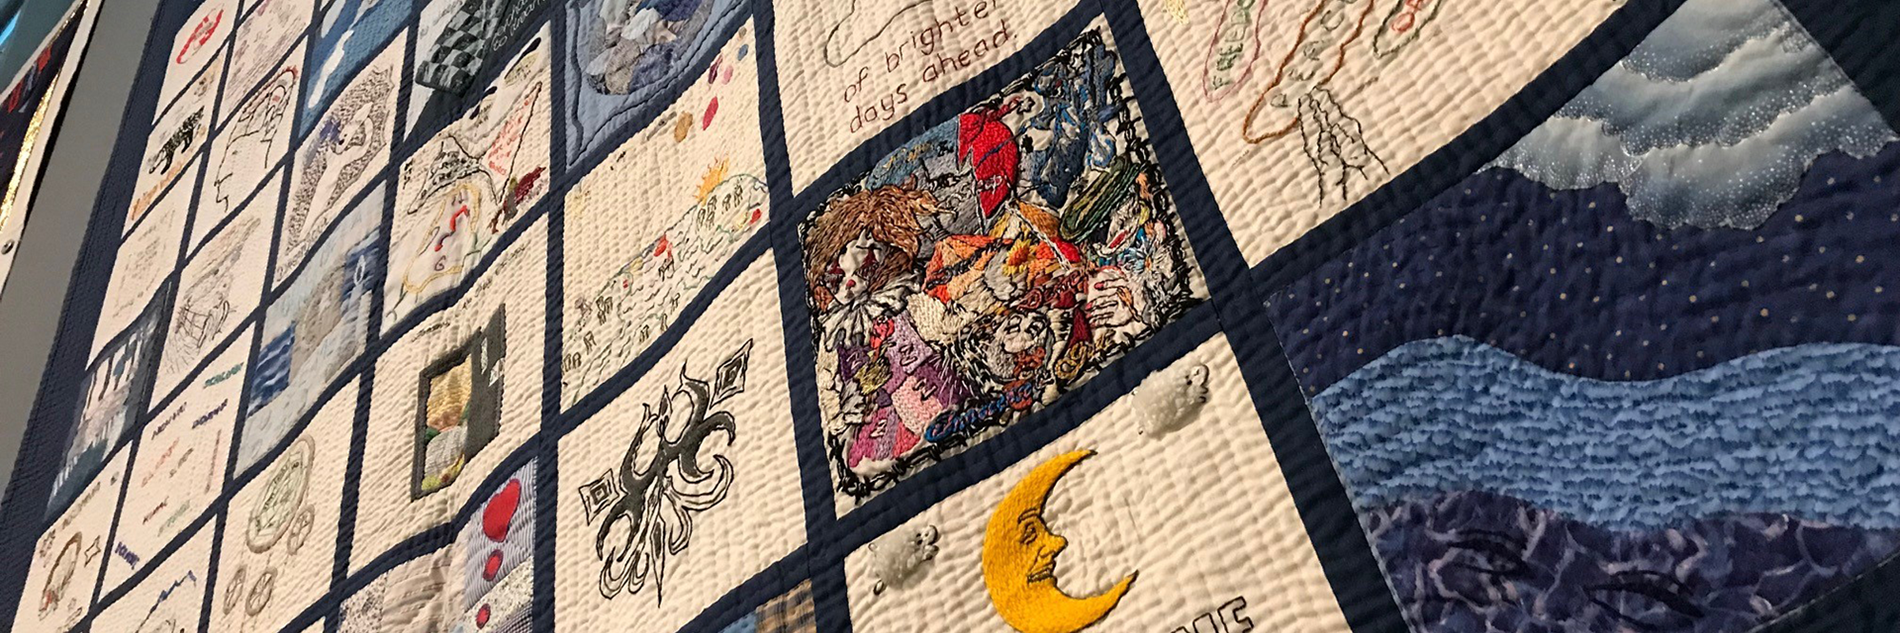 A large embroidered quilt, featuring patches with different designs.